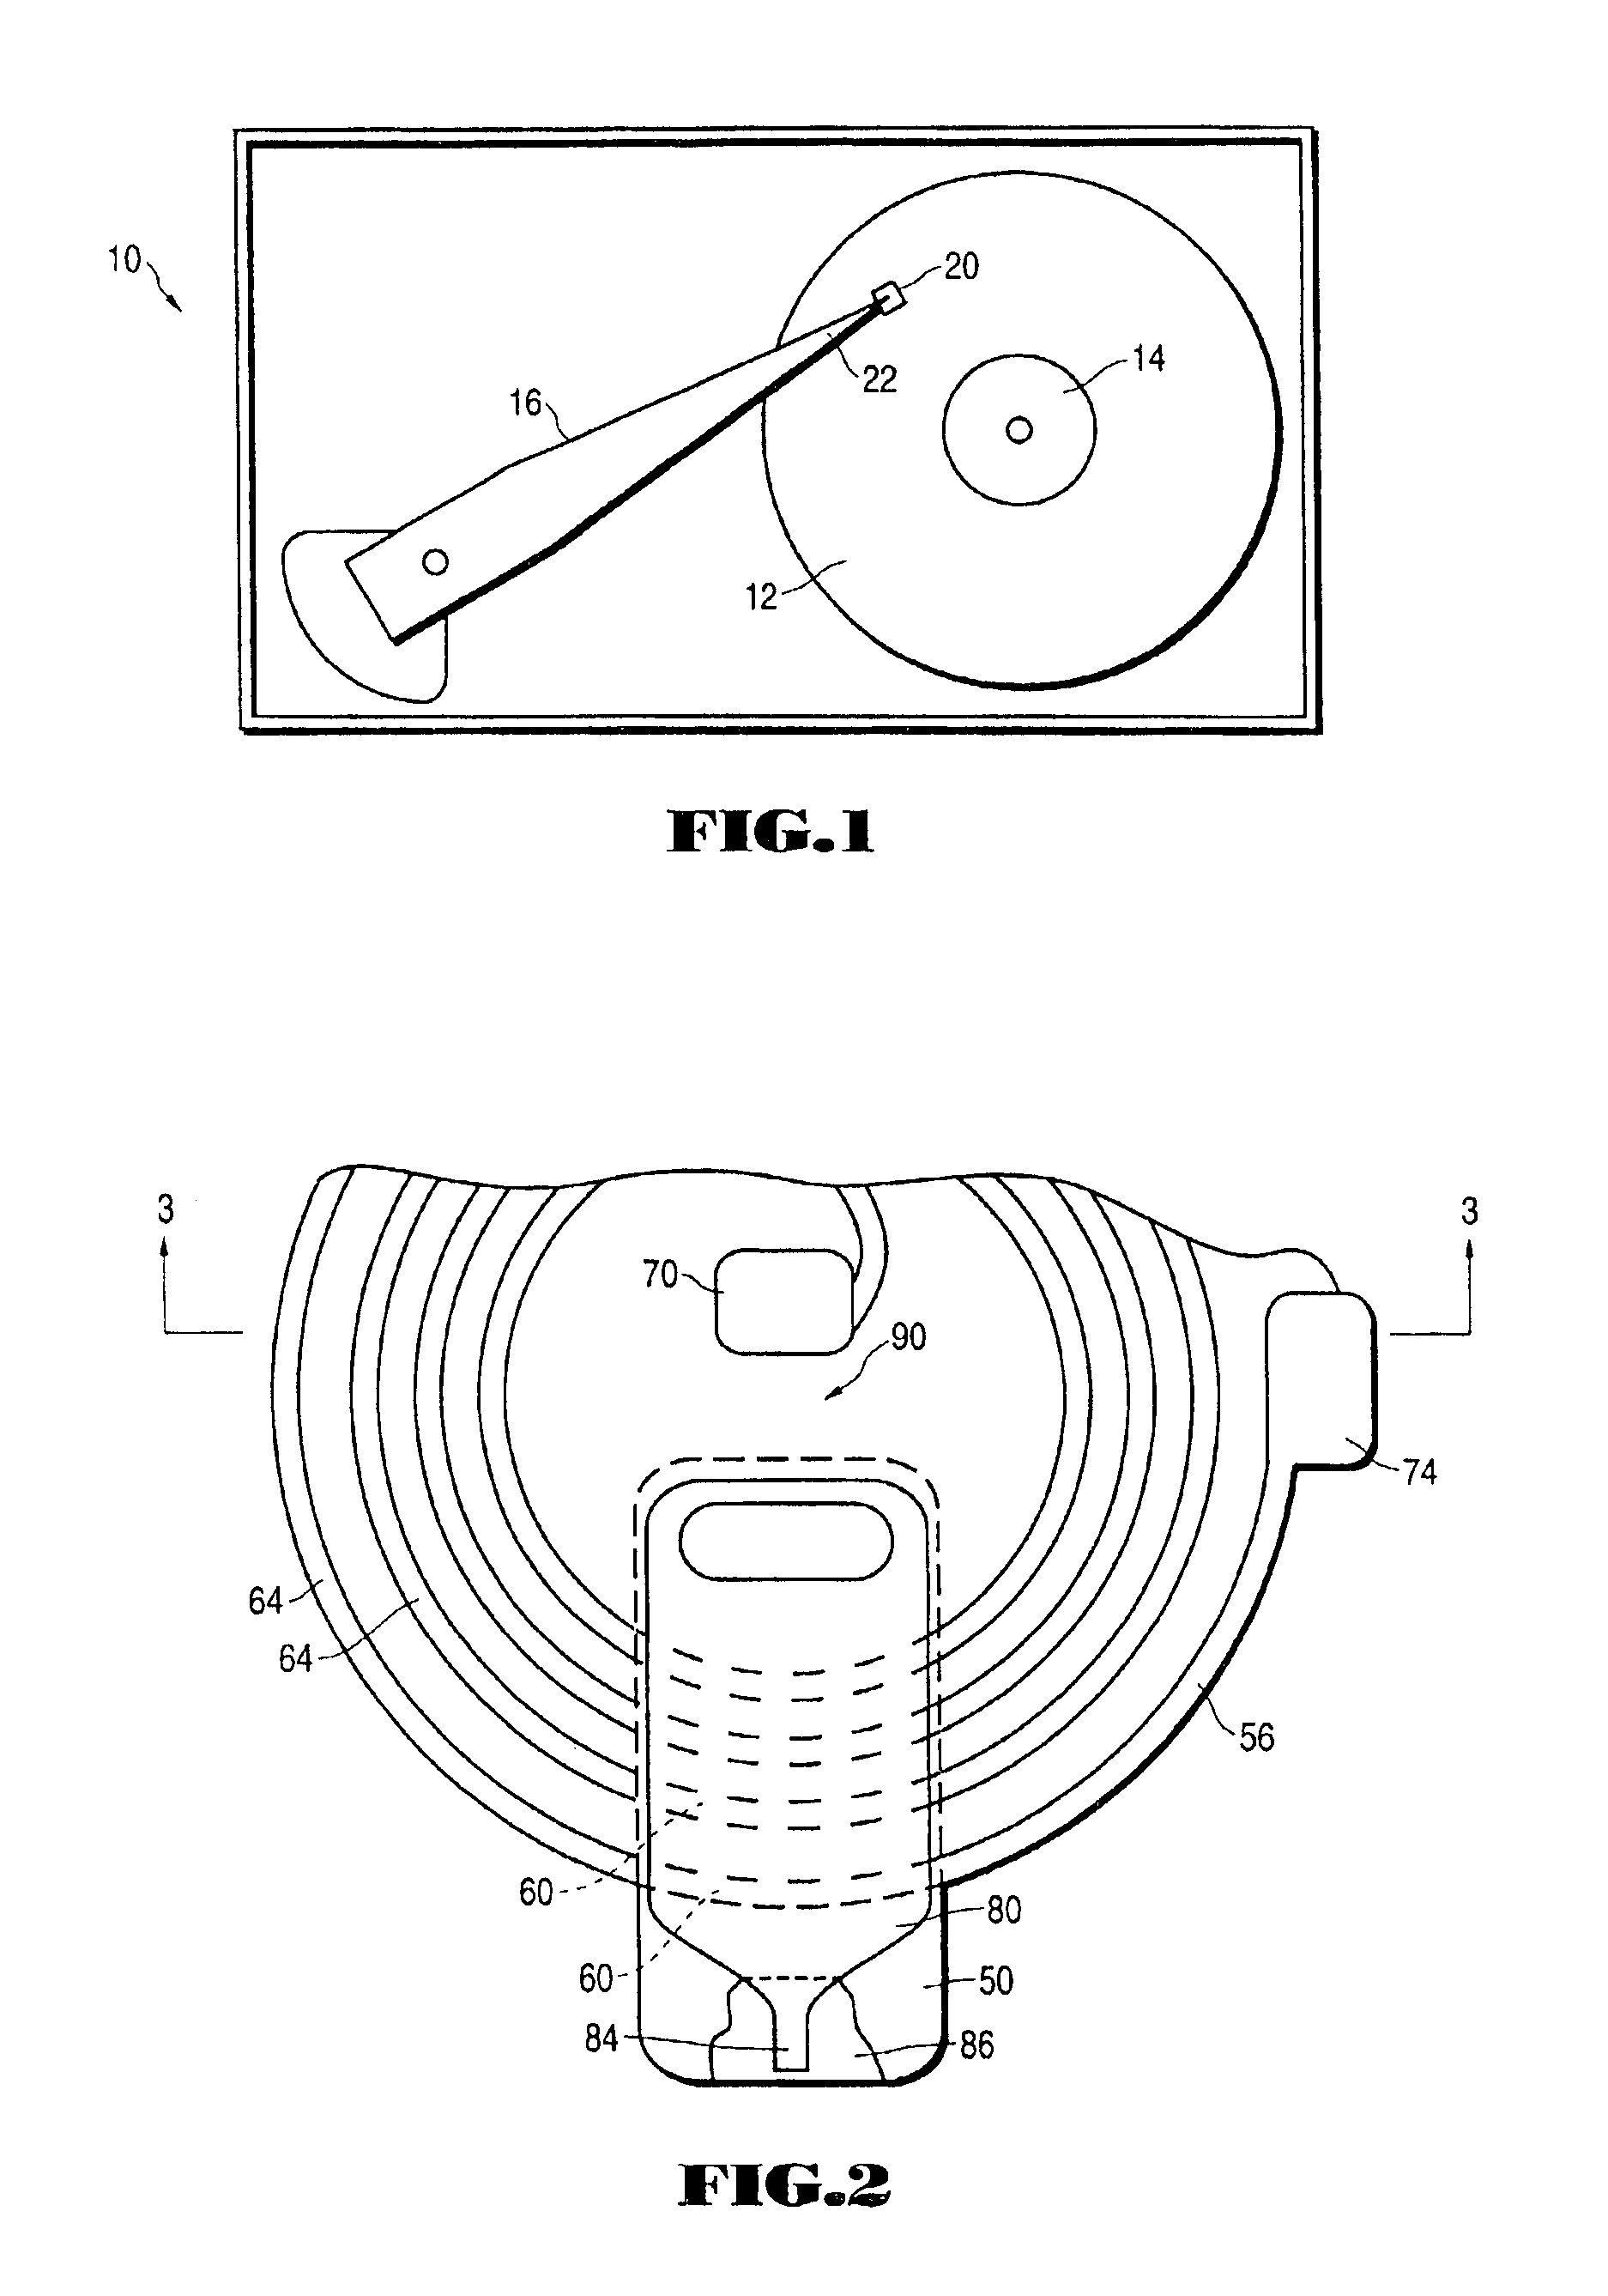 Magnetic head induction coil fabrication method utilizing aspect ratio dependent etching